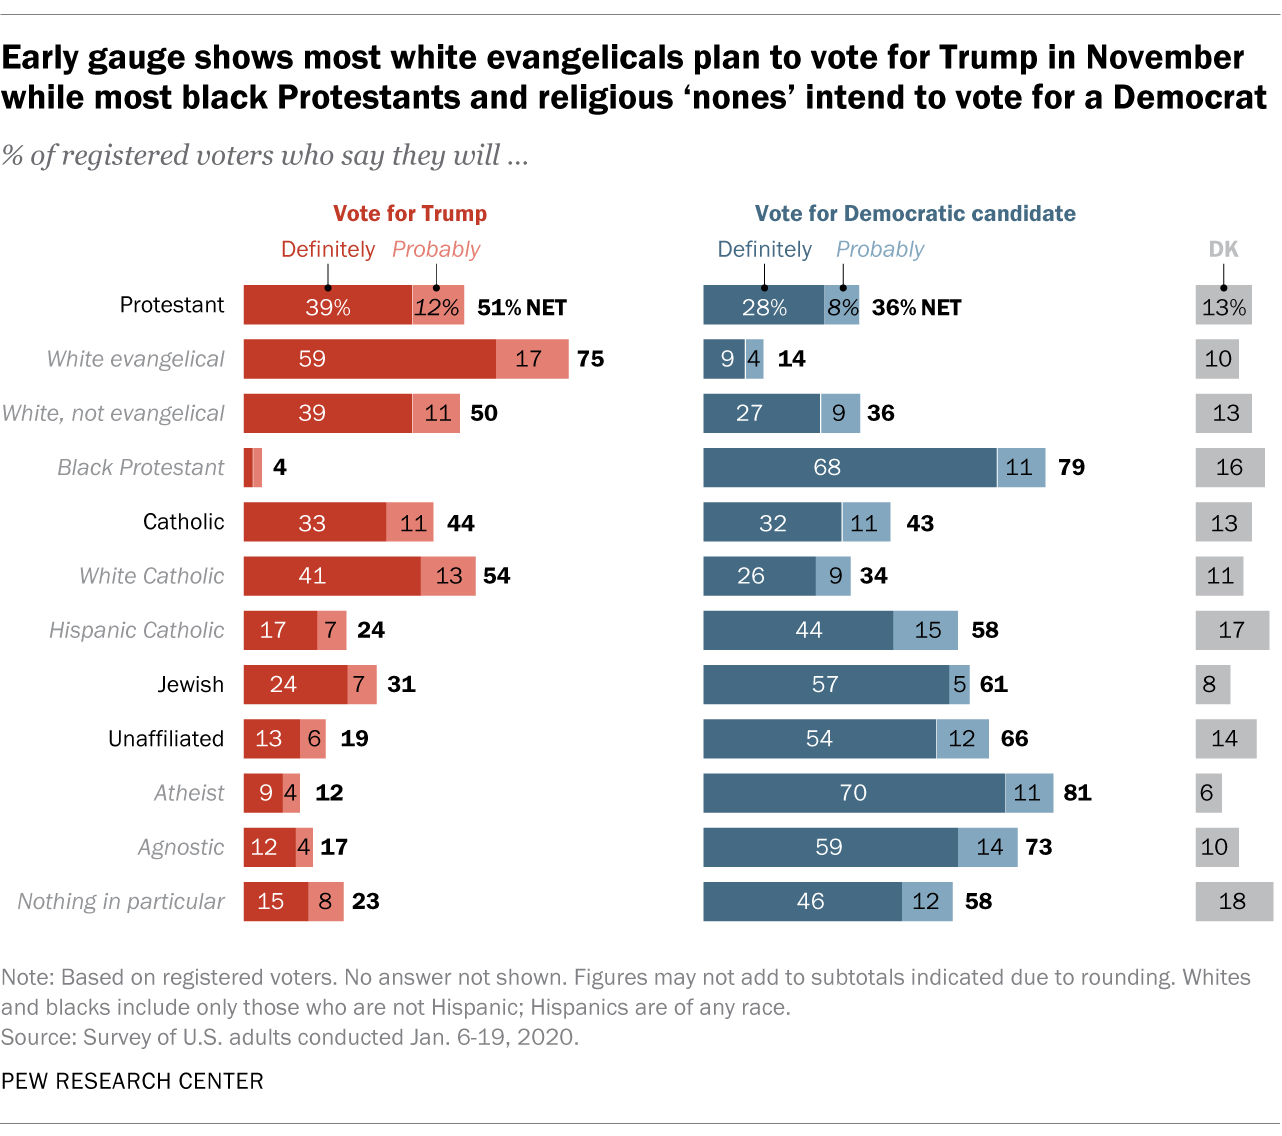 Early gauge shows most white evangelicals plan to vote for Trump in November while most black Protestants and religious 'nones' intend to vote for a Democrat